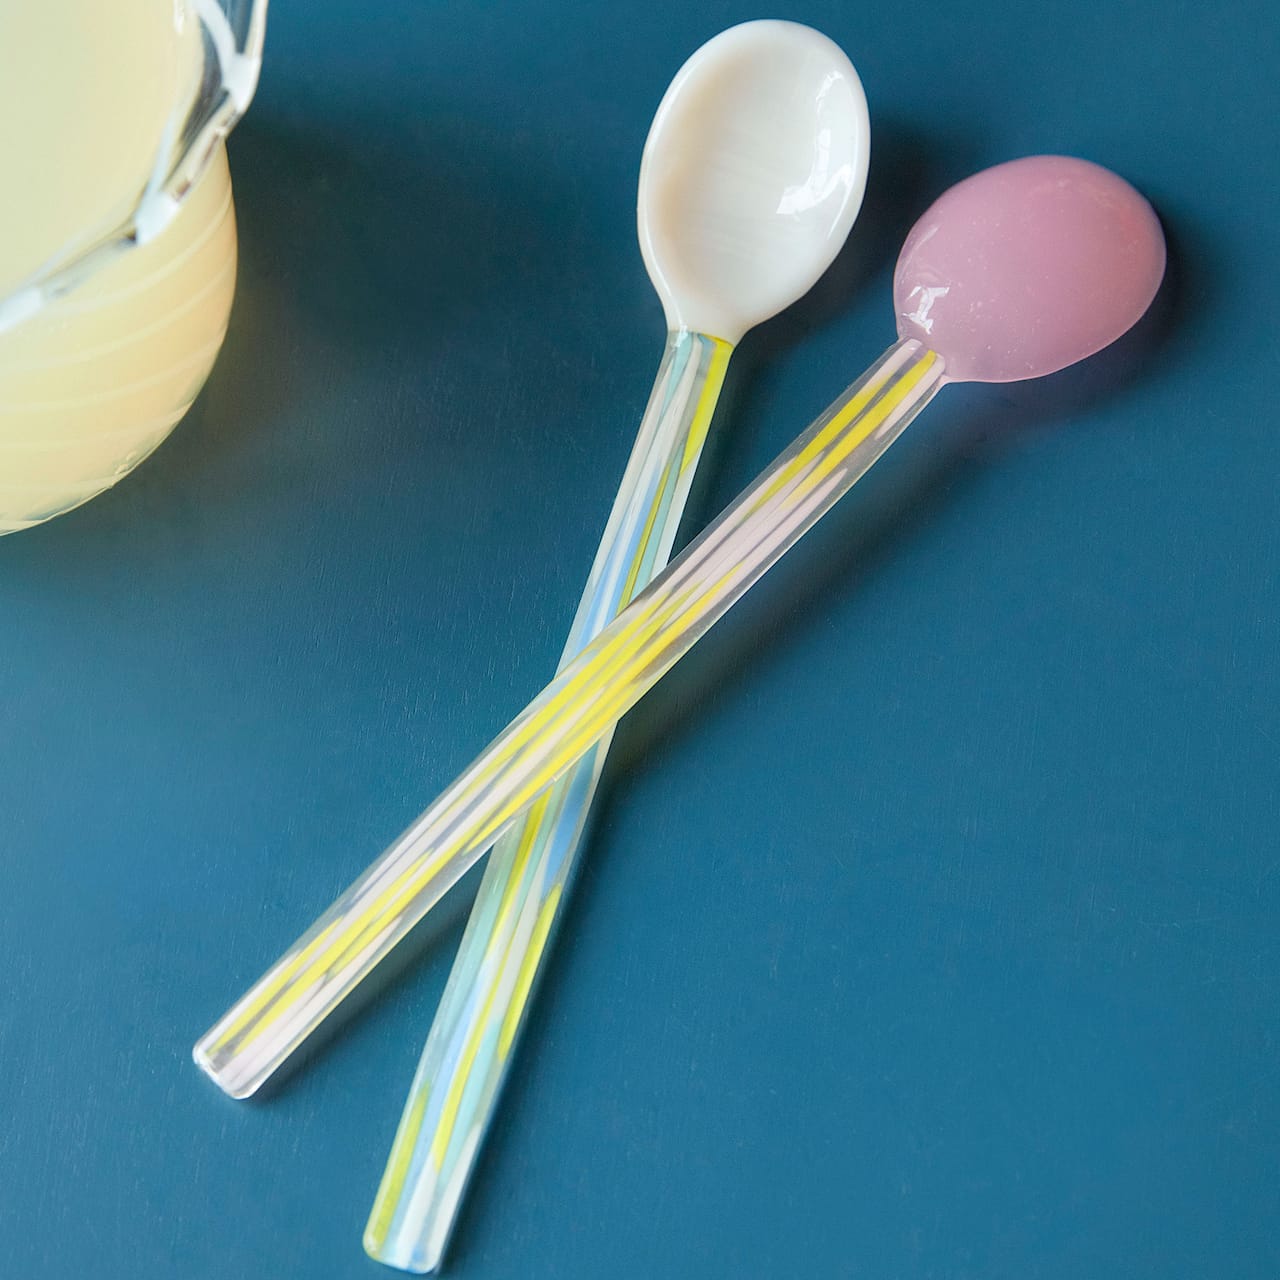 Glass Spoons Flat Set of 2 - Light Pink / White